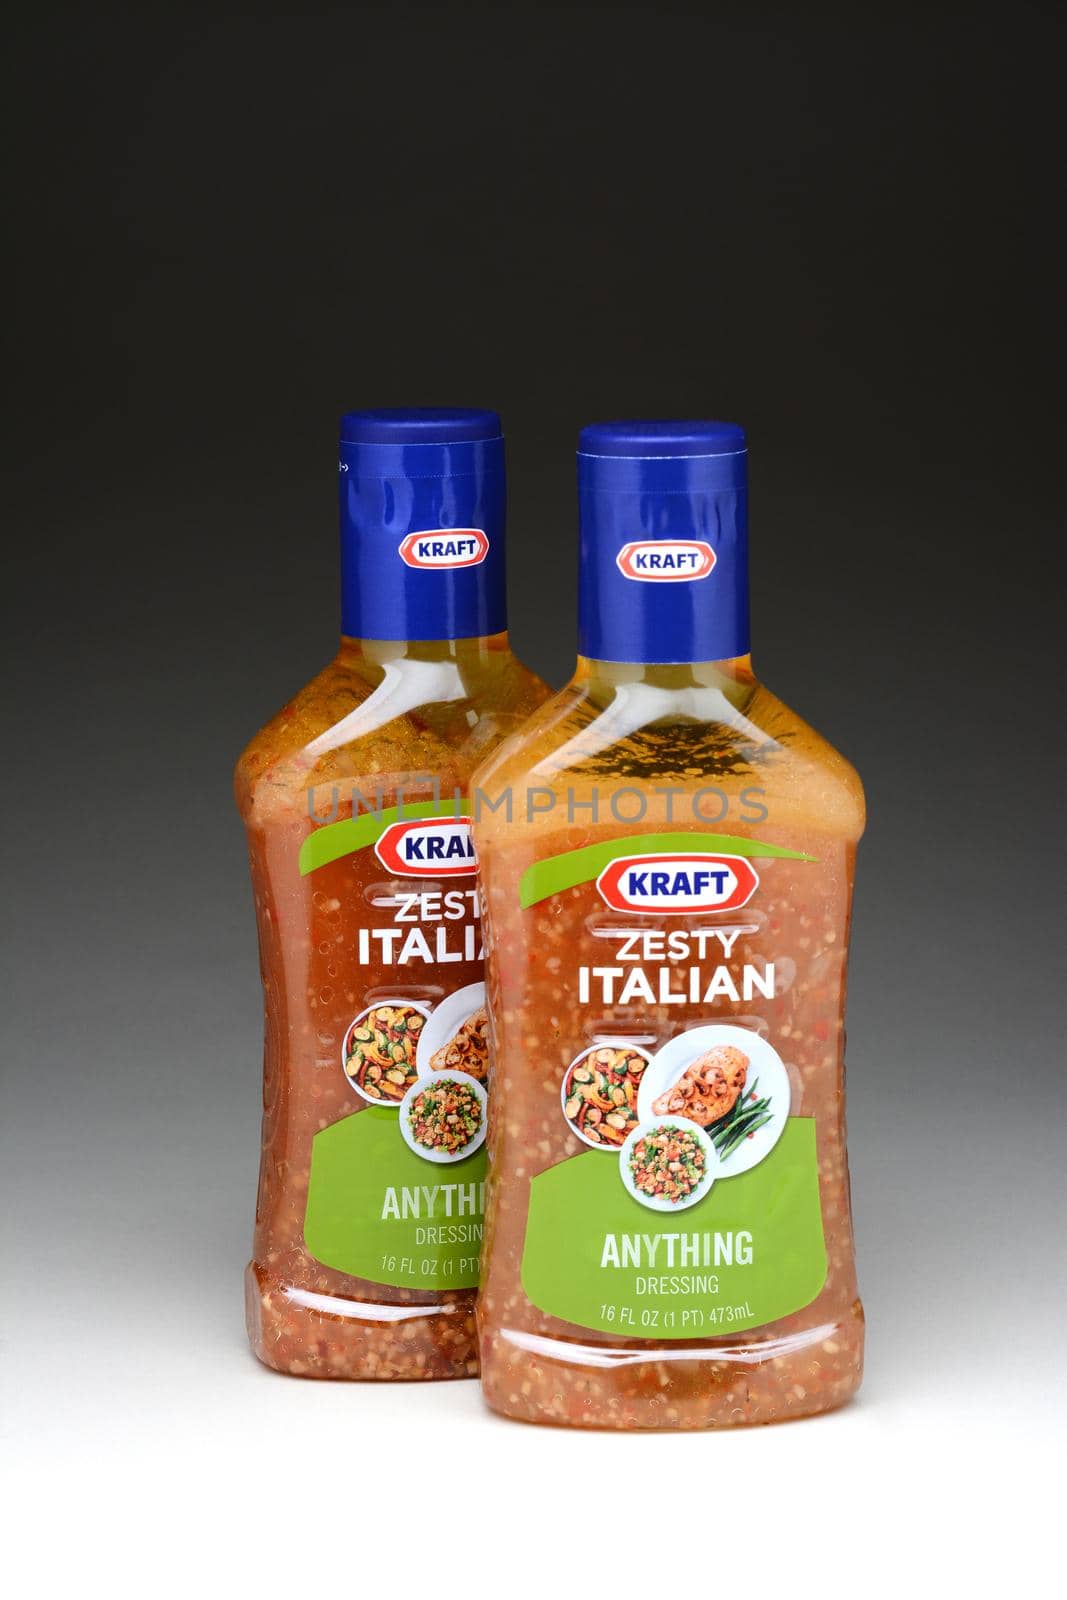 IRVINE, CA - January 11, 2013: Two 16oz. bottles of Kraft Zesty Italian Anything Dressing. Kraft Foods has 27 brands with sales in excess of $100 million annually.